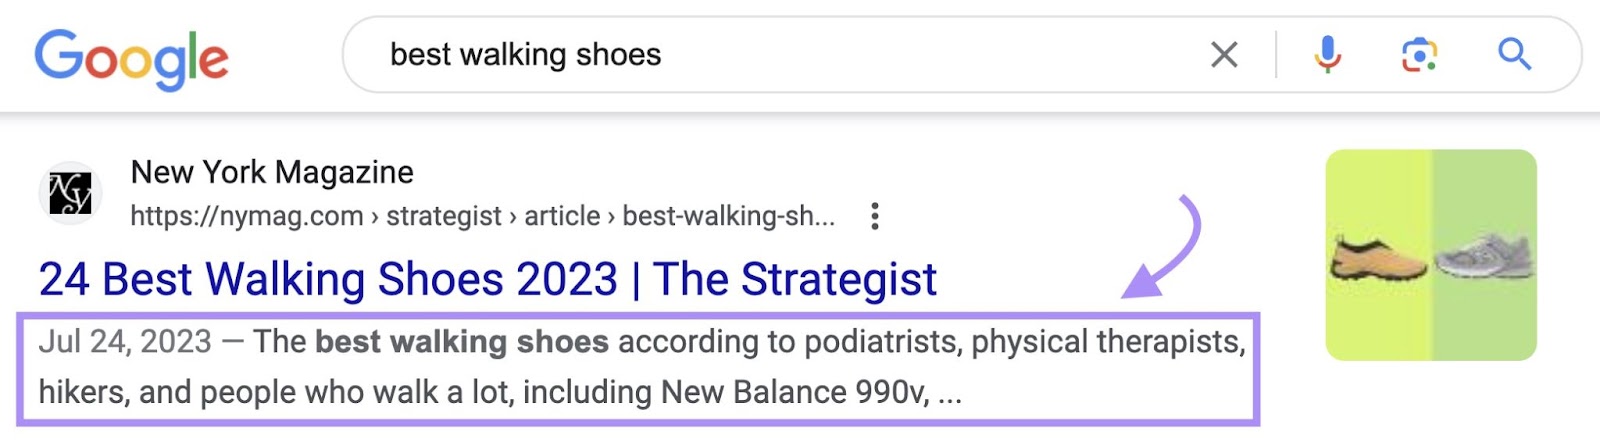 A meta description highlighted under the New York Magazine's article on best walking shoes for 2023